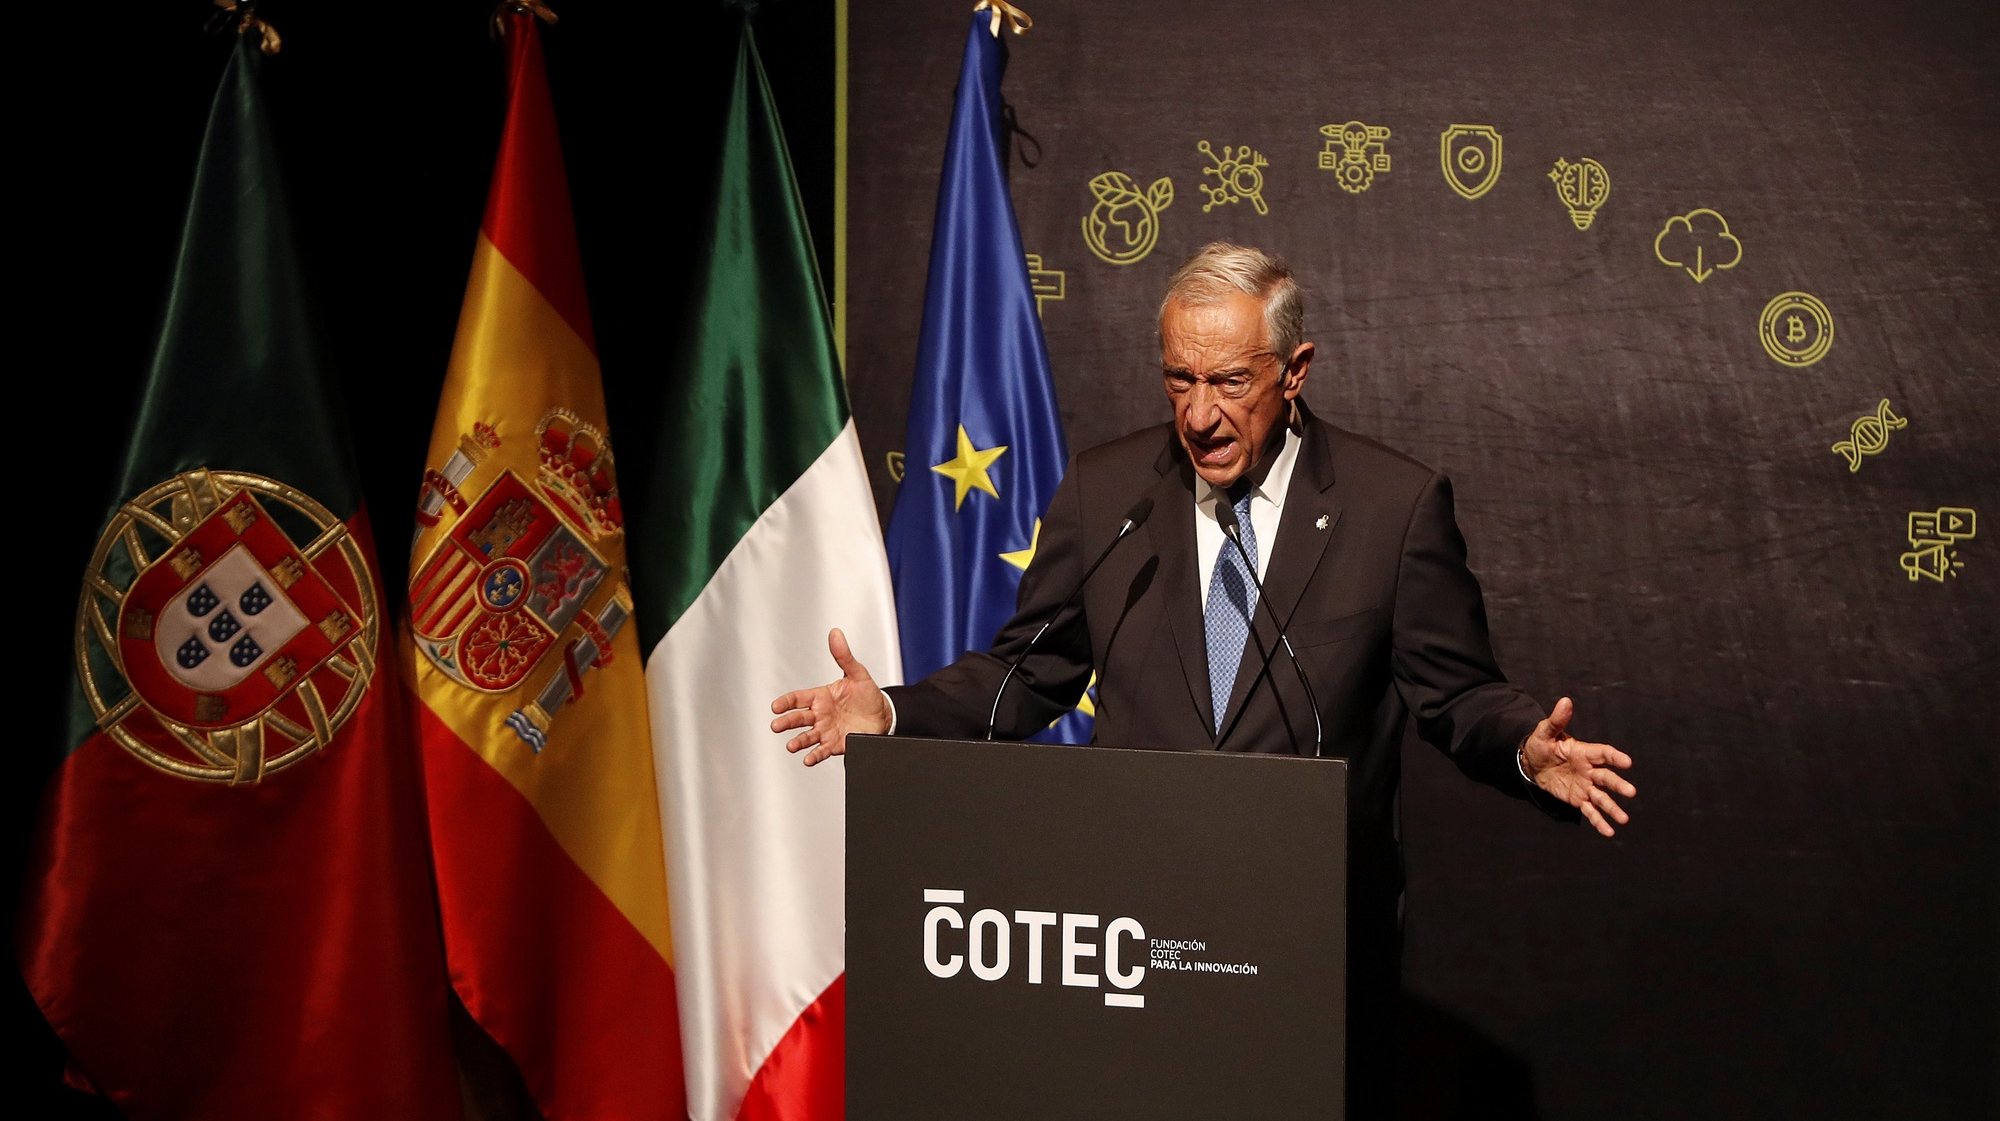 epa09587747 Portuguese President Marcelo Rebelo de Sousa delivers remarks during the closure of the Cotec Europa innovation summit in Malaga, southern Spain, 17 November 2021. Cotec Europa is an annual event on innovation with the presence of Spain, Portugal and Italy&#039;s Heads of State.  EPA/JORGE ZAPATA